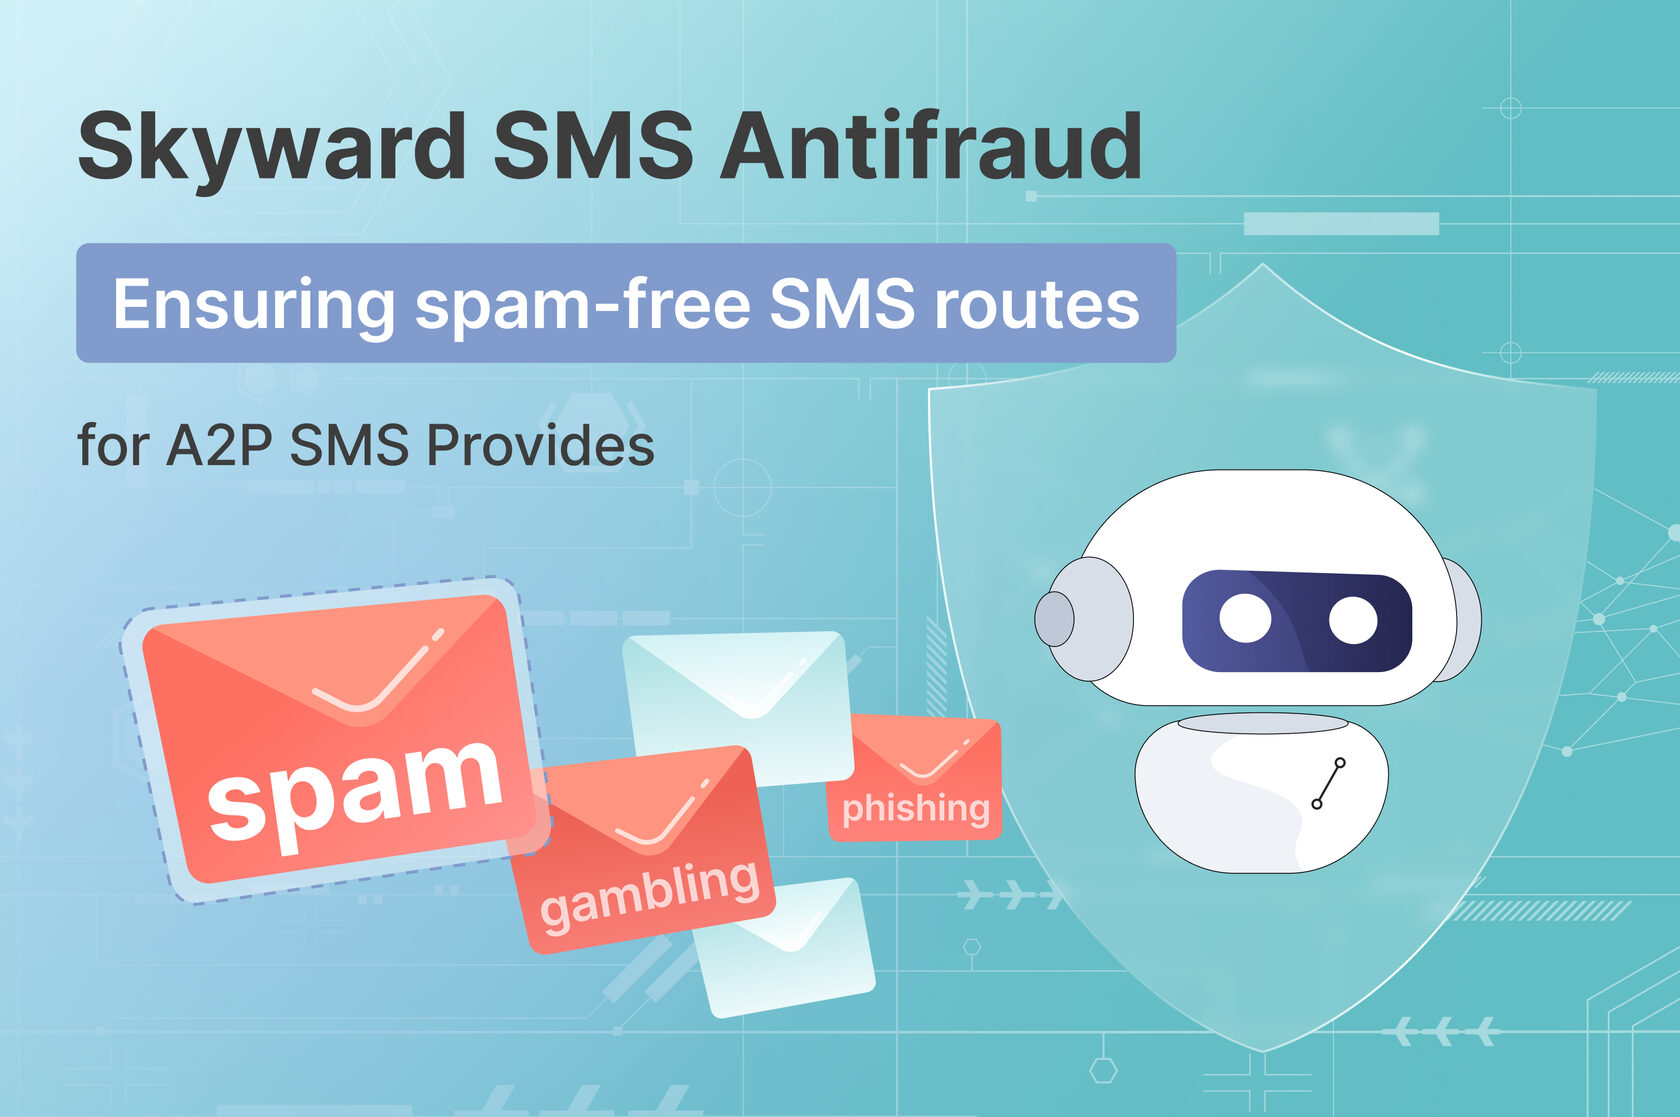 SMS fraud management solution for telecoms to prevent fraudster attacks. This security solution can detect and automatically block external attacks and suspicious traffic.